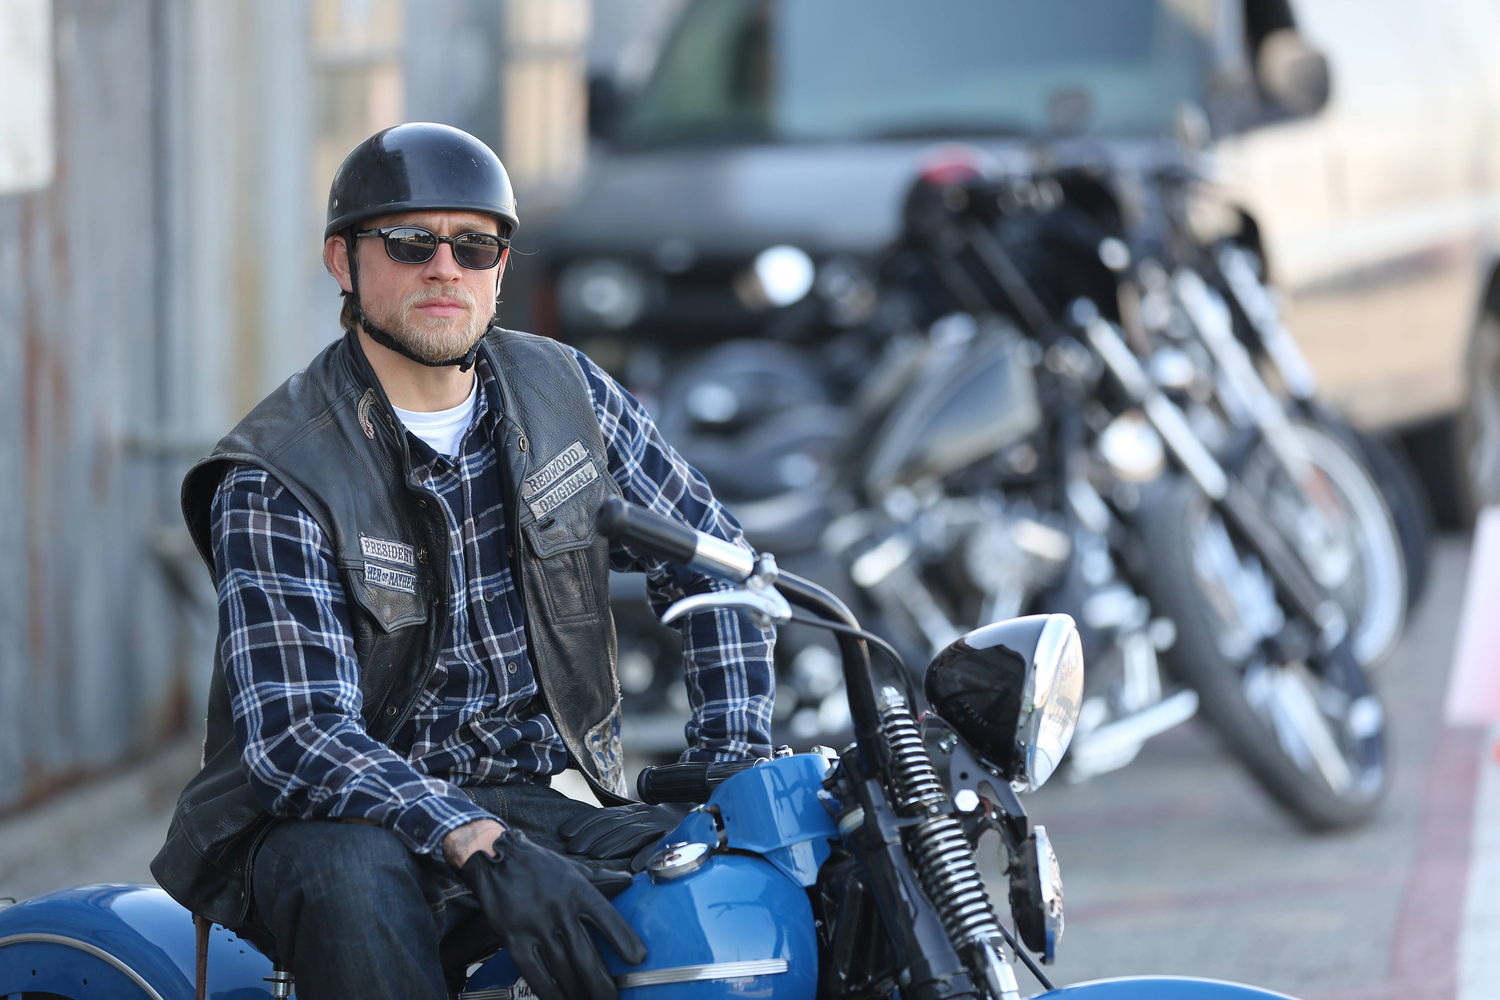 Charlie Hunnam in Sons of Anarchy (2008)